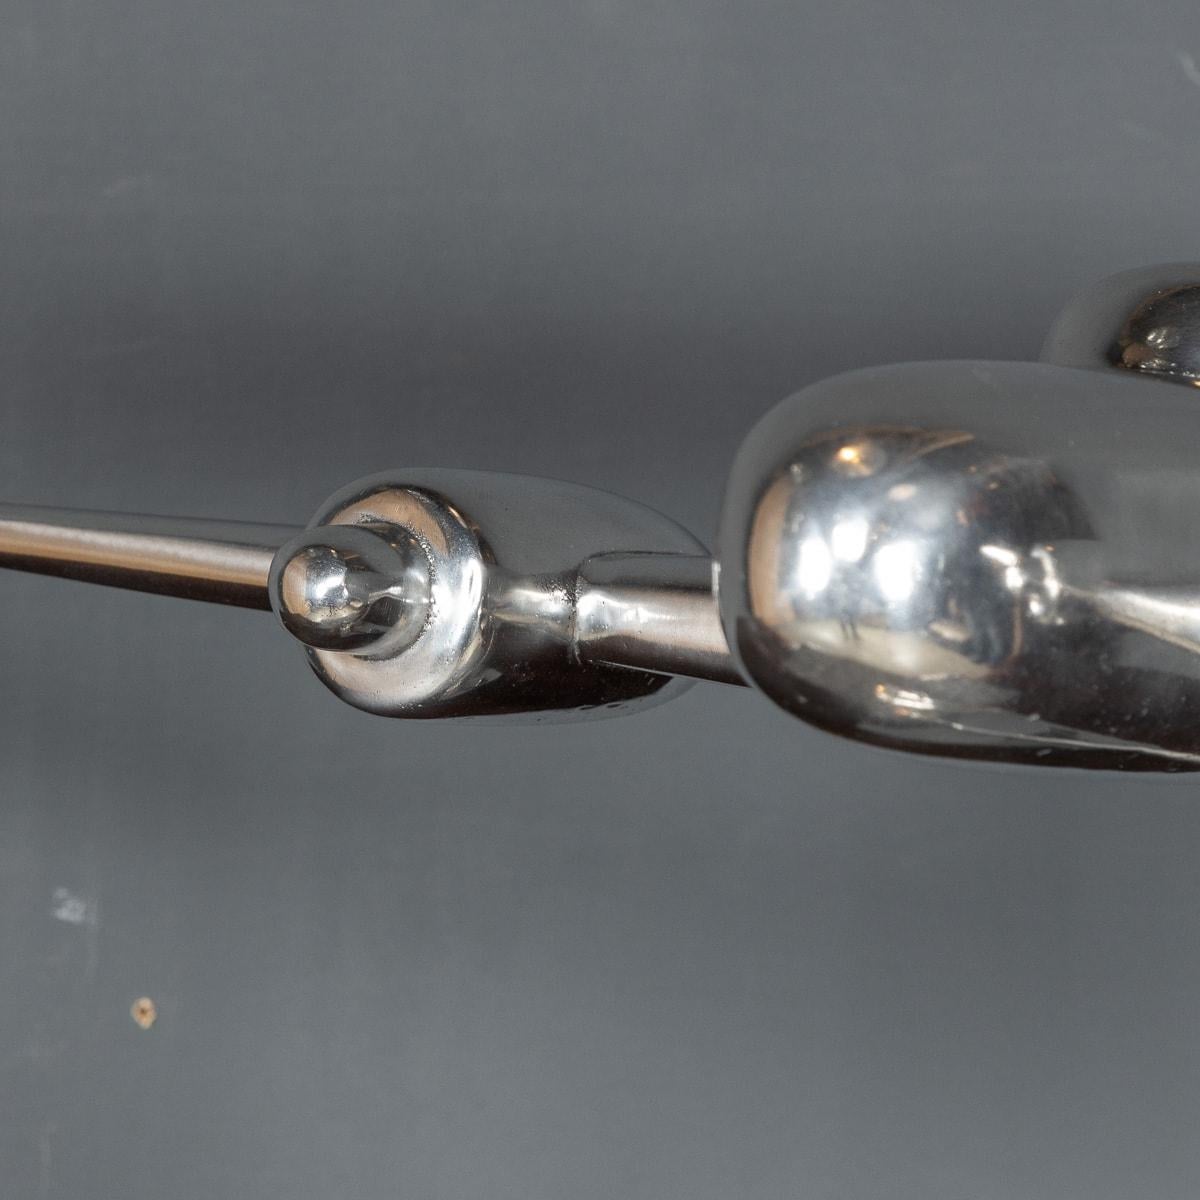 20th Century Polished Aluminium Model Of A Bomber Airplane, c.1950 For Sale 2